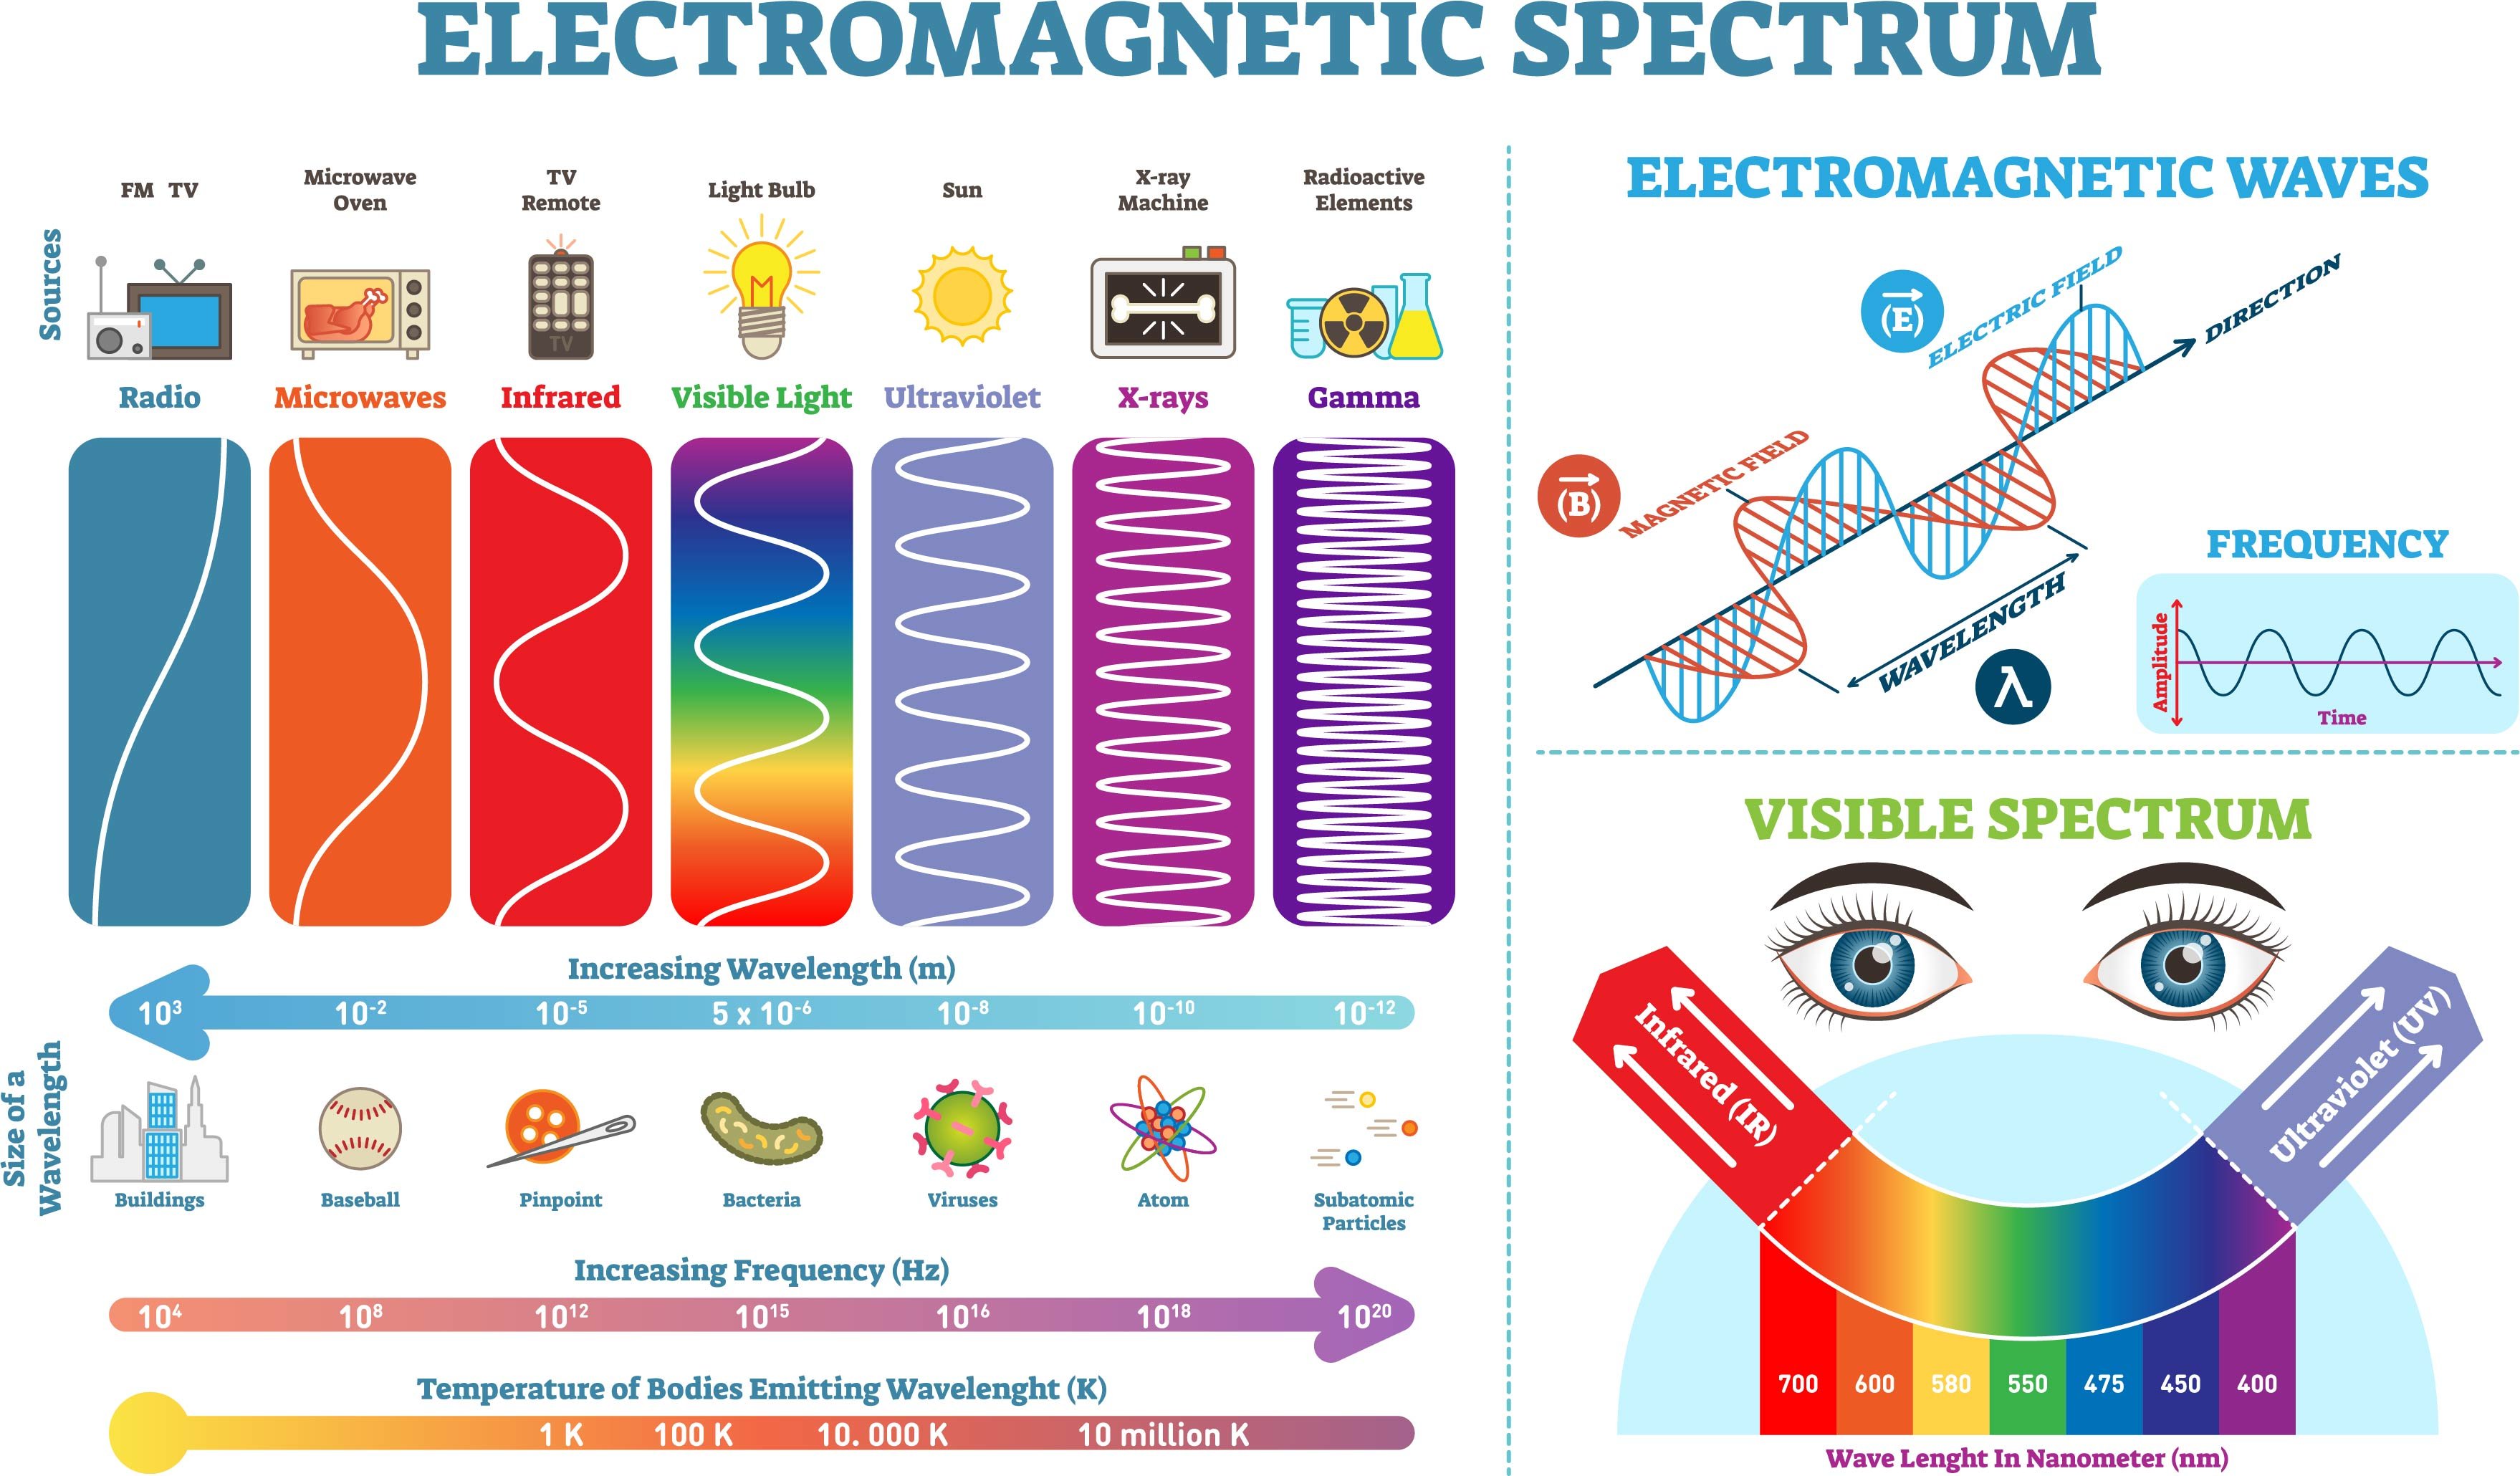 An overview of the electromagnetic spectrum